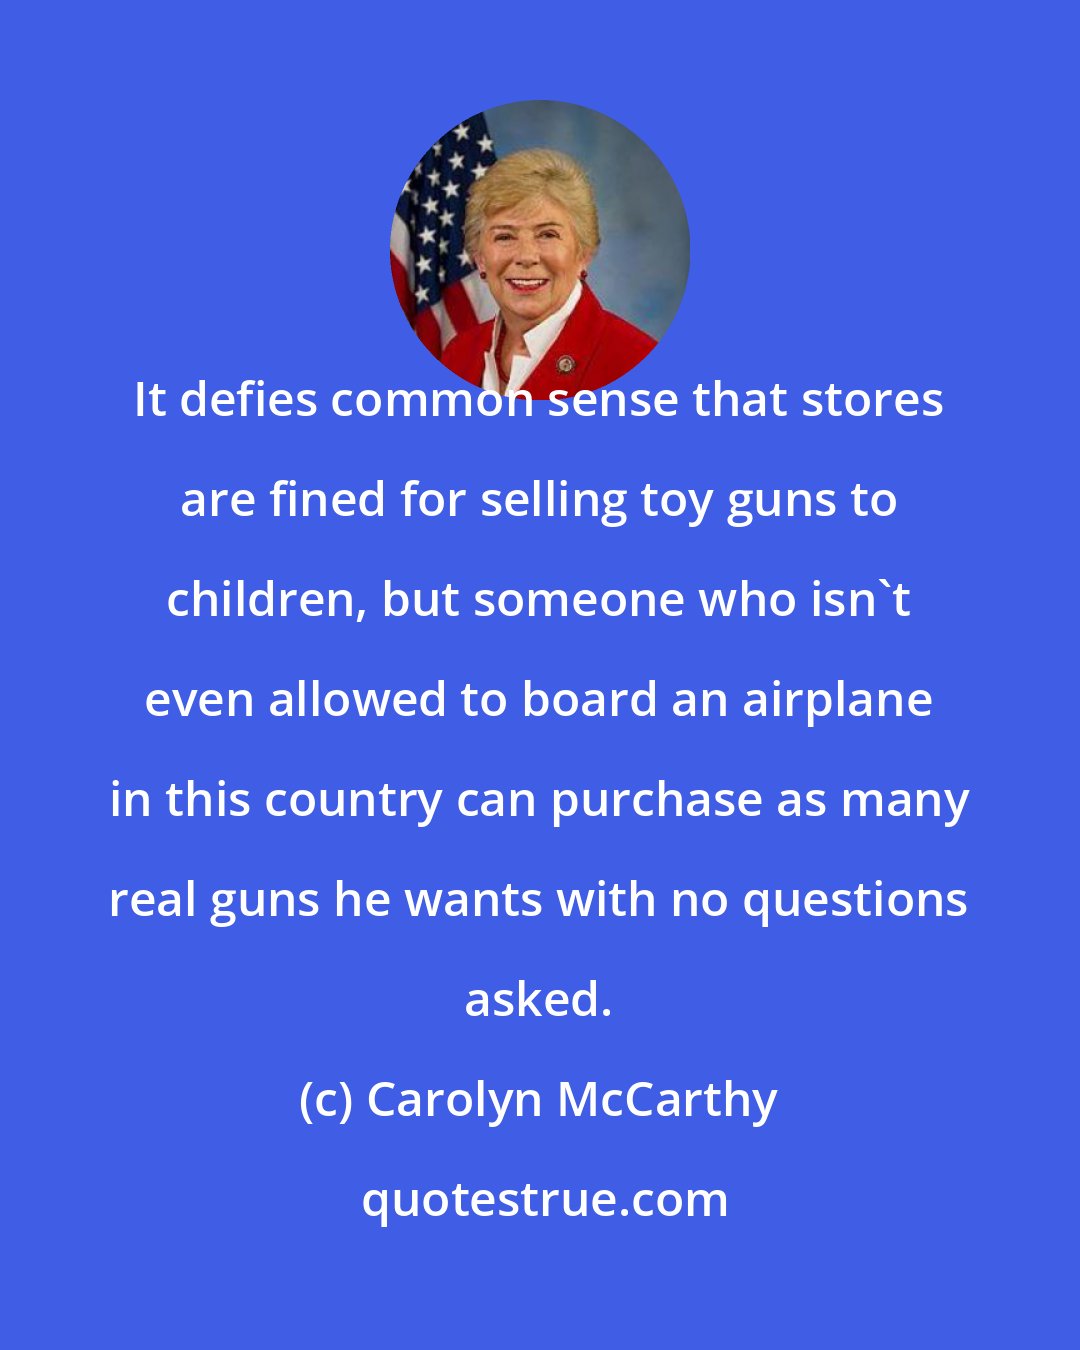 Carolyn McCarthy: It defies common sense that stores are fined for selling toy guns to children, but someone who isn't even allowed to board an airplane in this country can purchase as many real guns he wants with no questions asked.